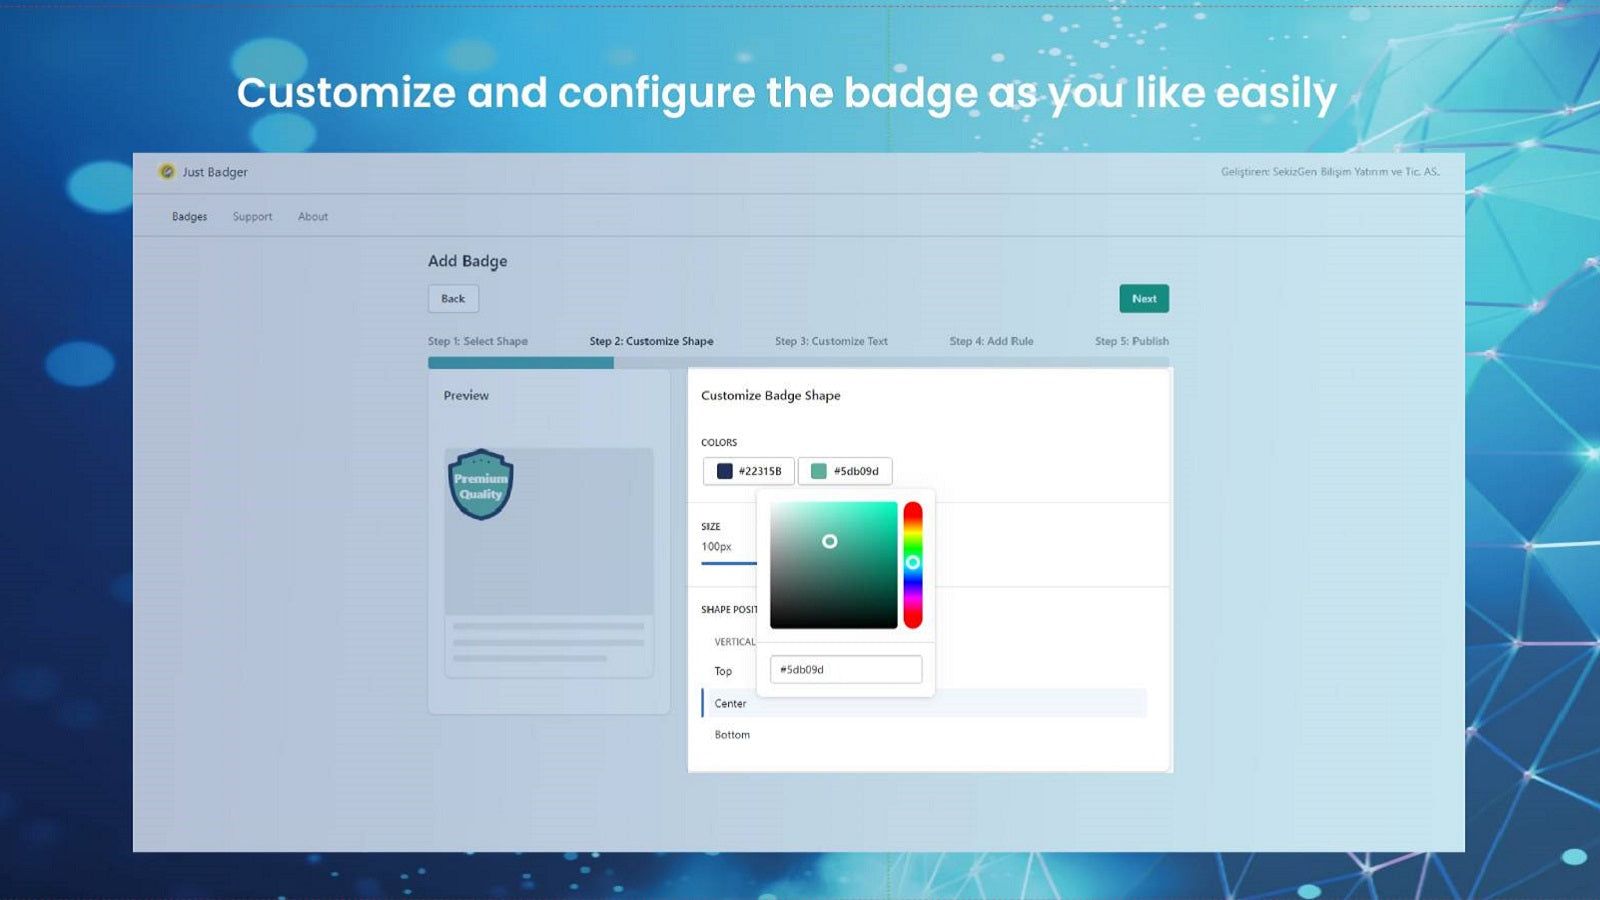 Customize and configure the badge as you like easily